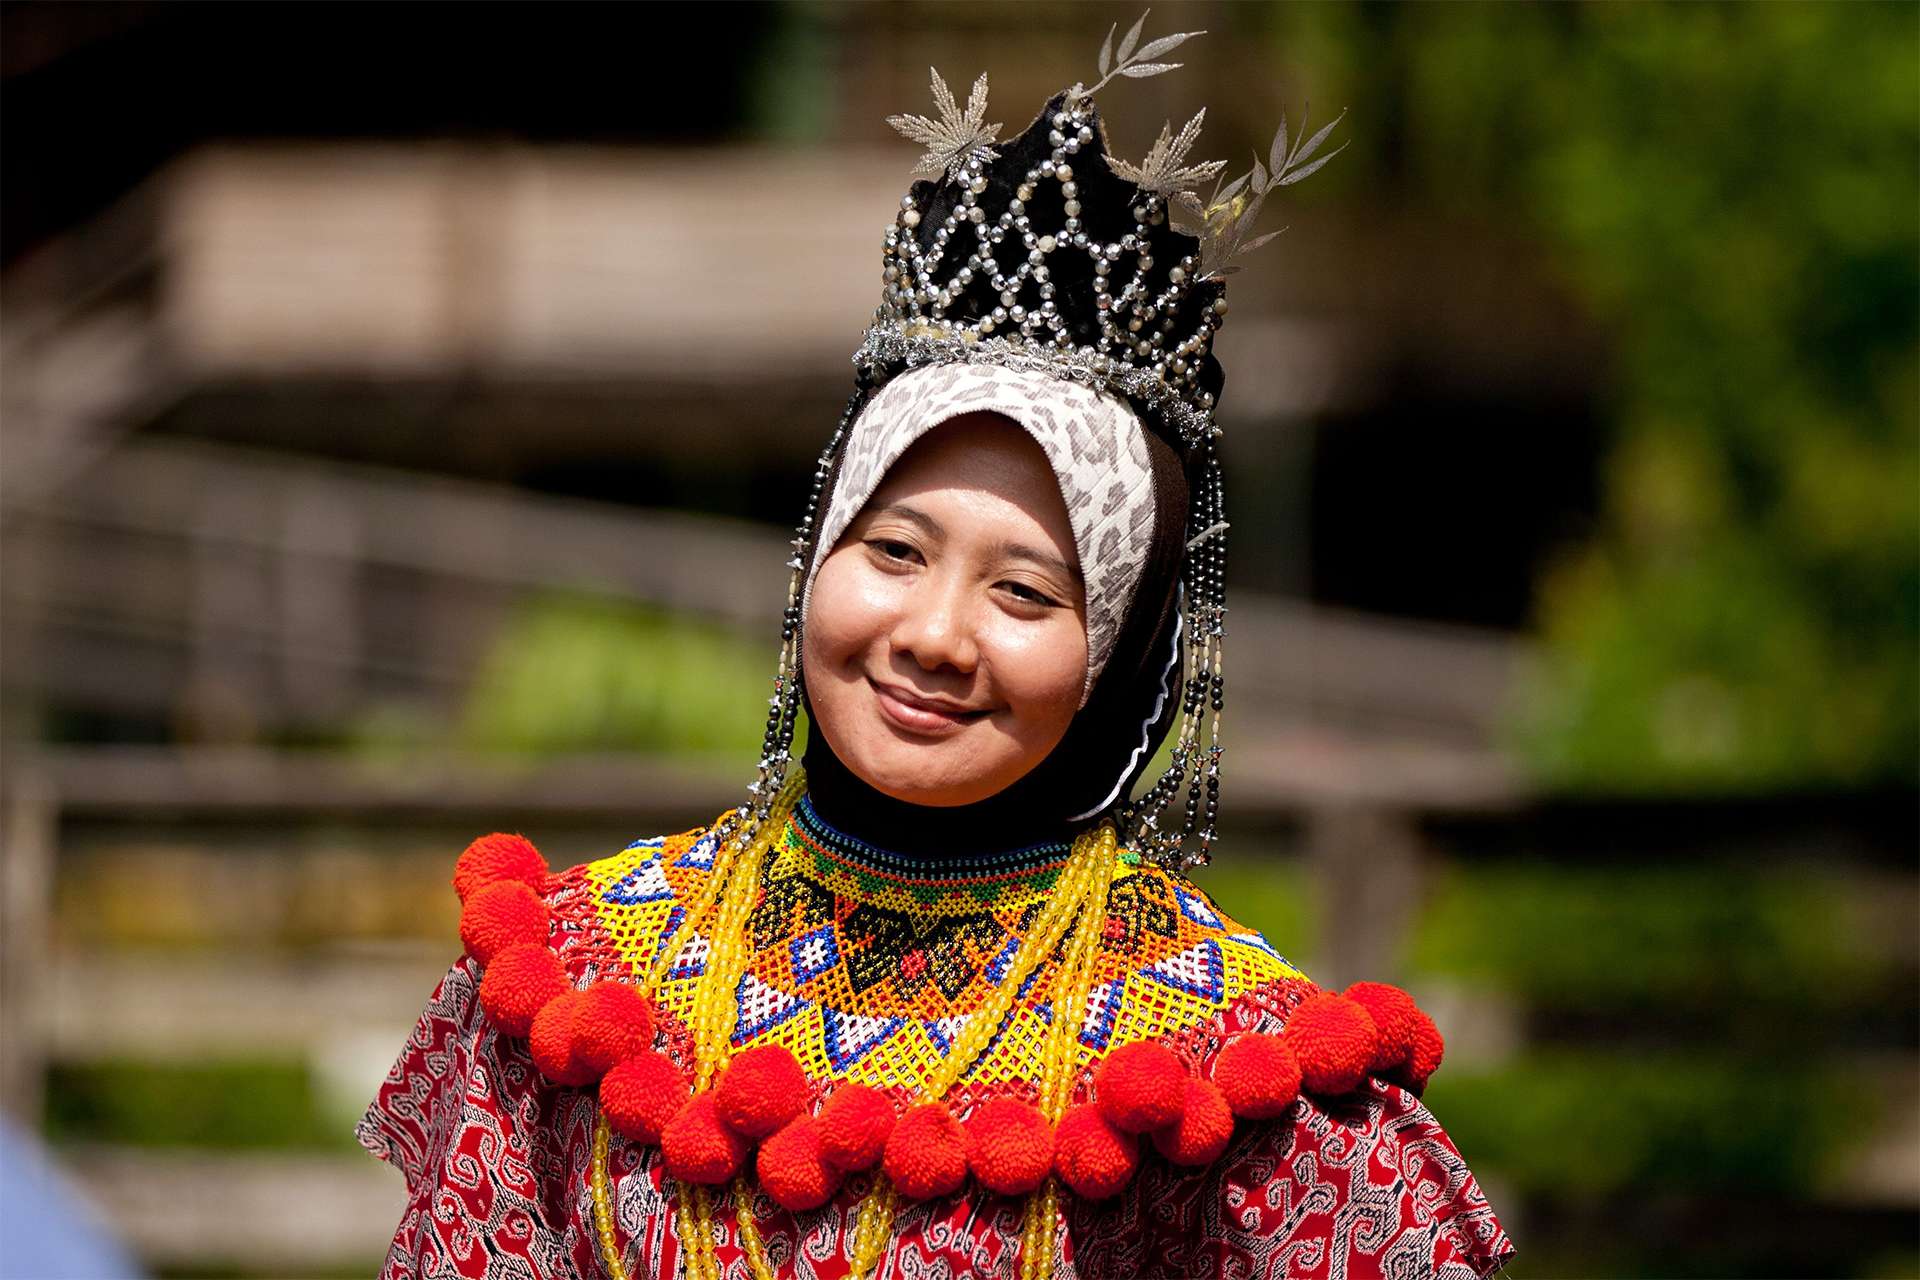 Indigenous woman Borneo in traditional clothing